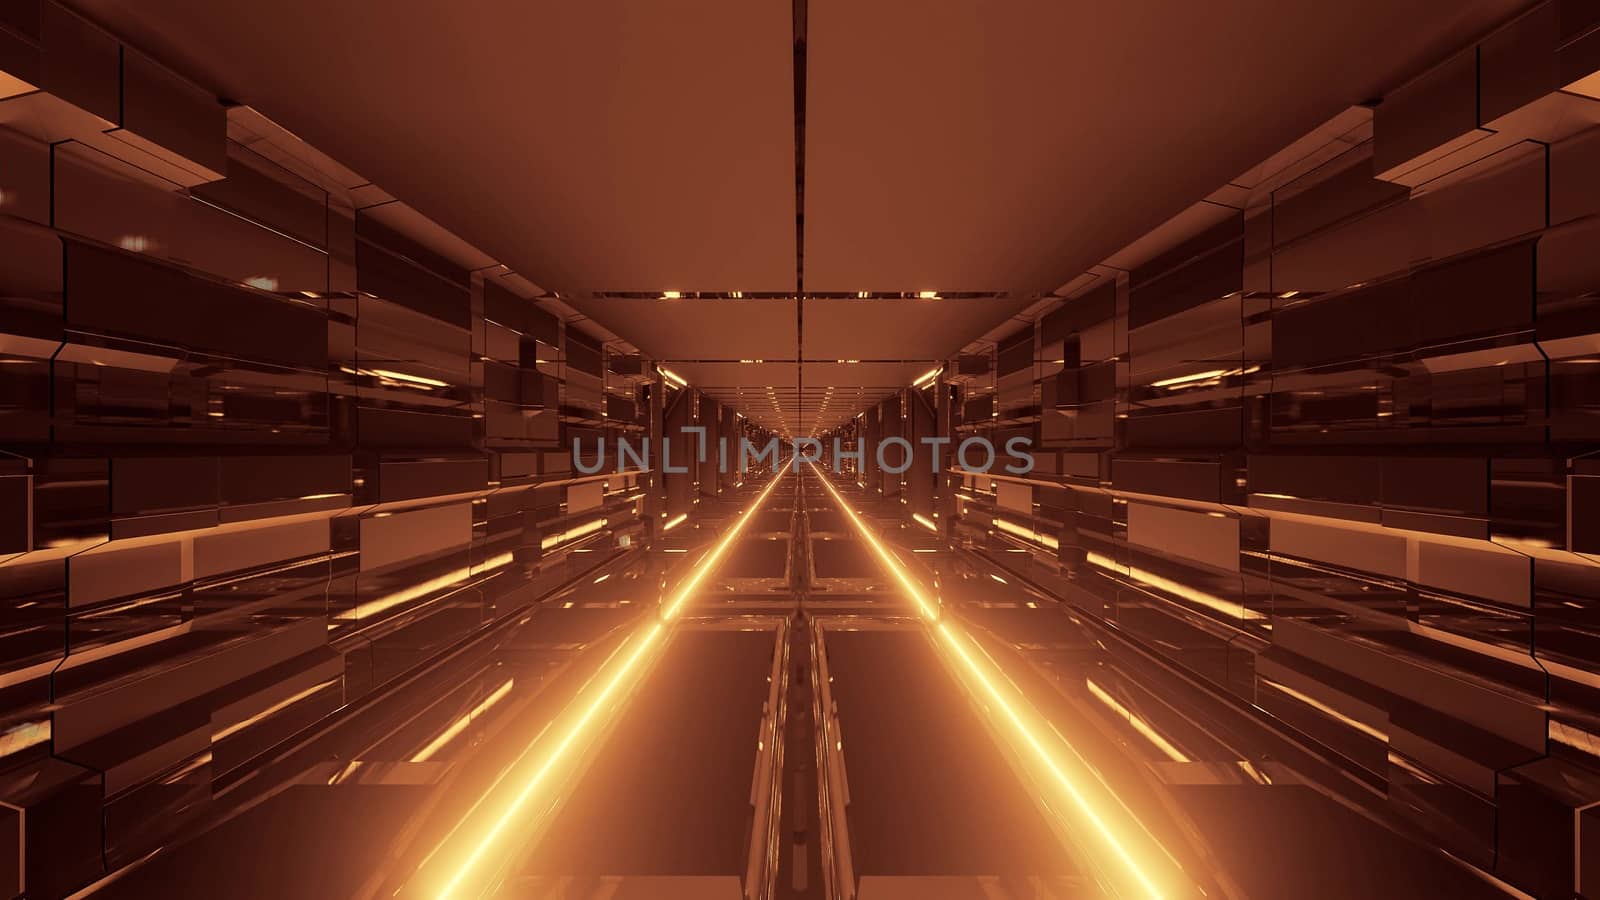 futuristic technical science-fiction tunnel corridor with endless glowing lights 3d illustration background wallpaper graphic artwork by tunnelmotions